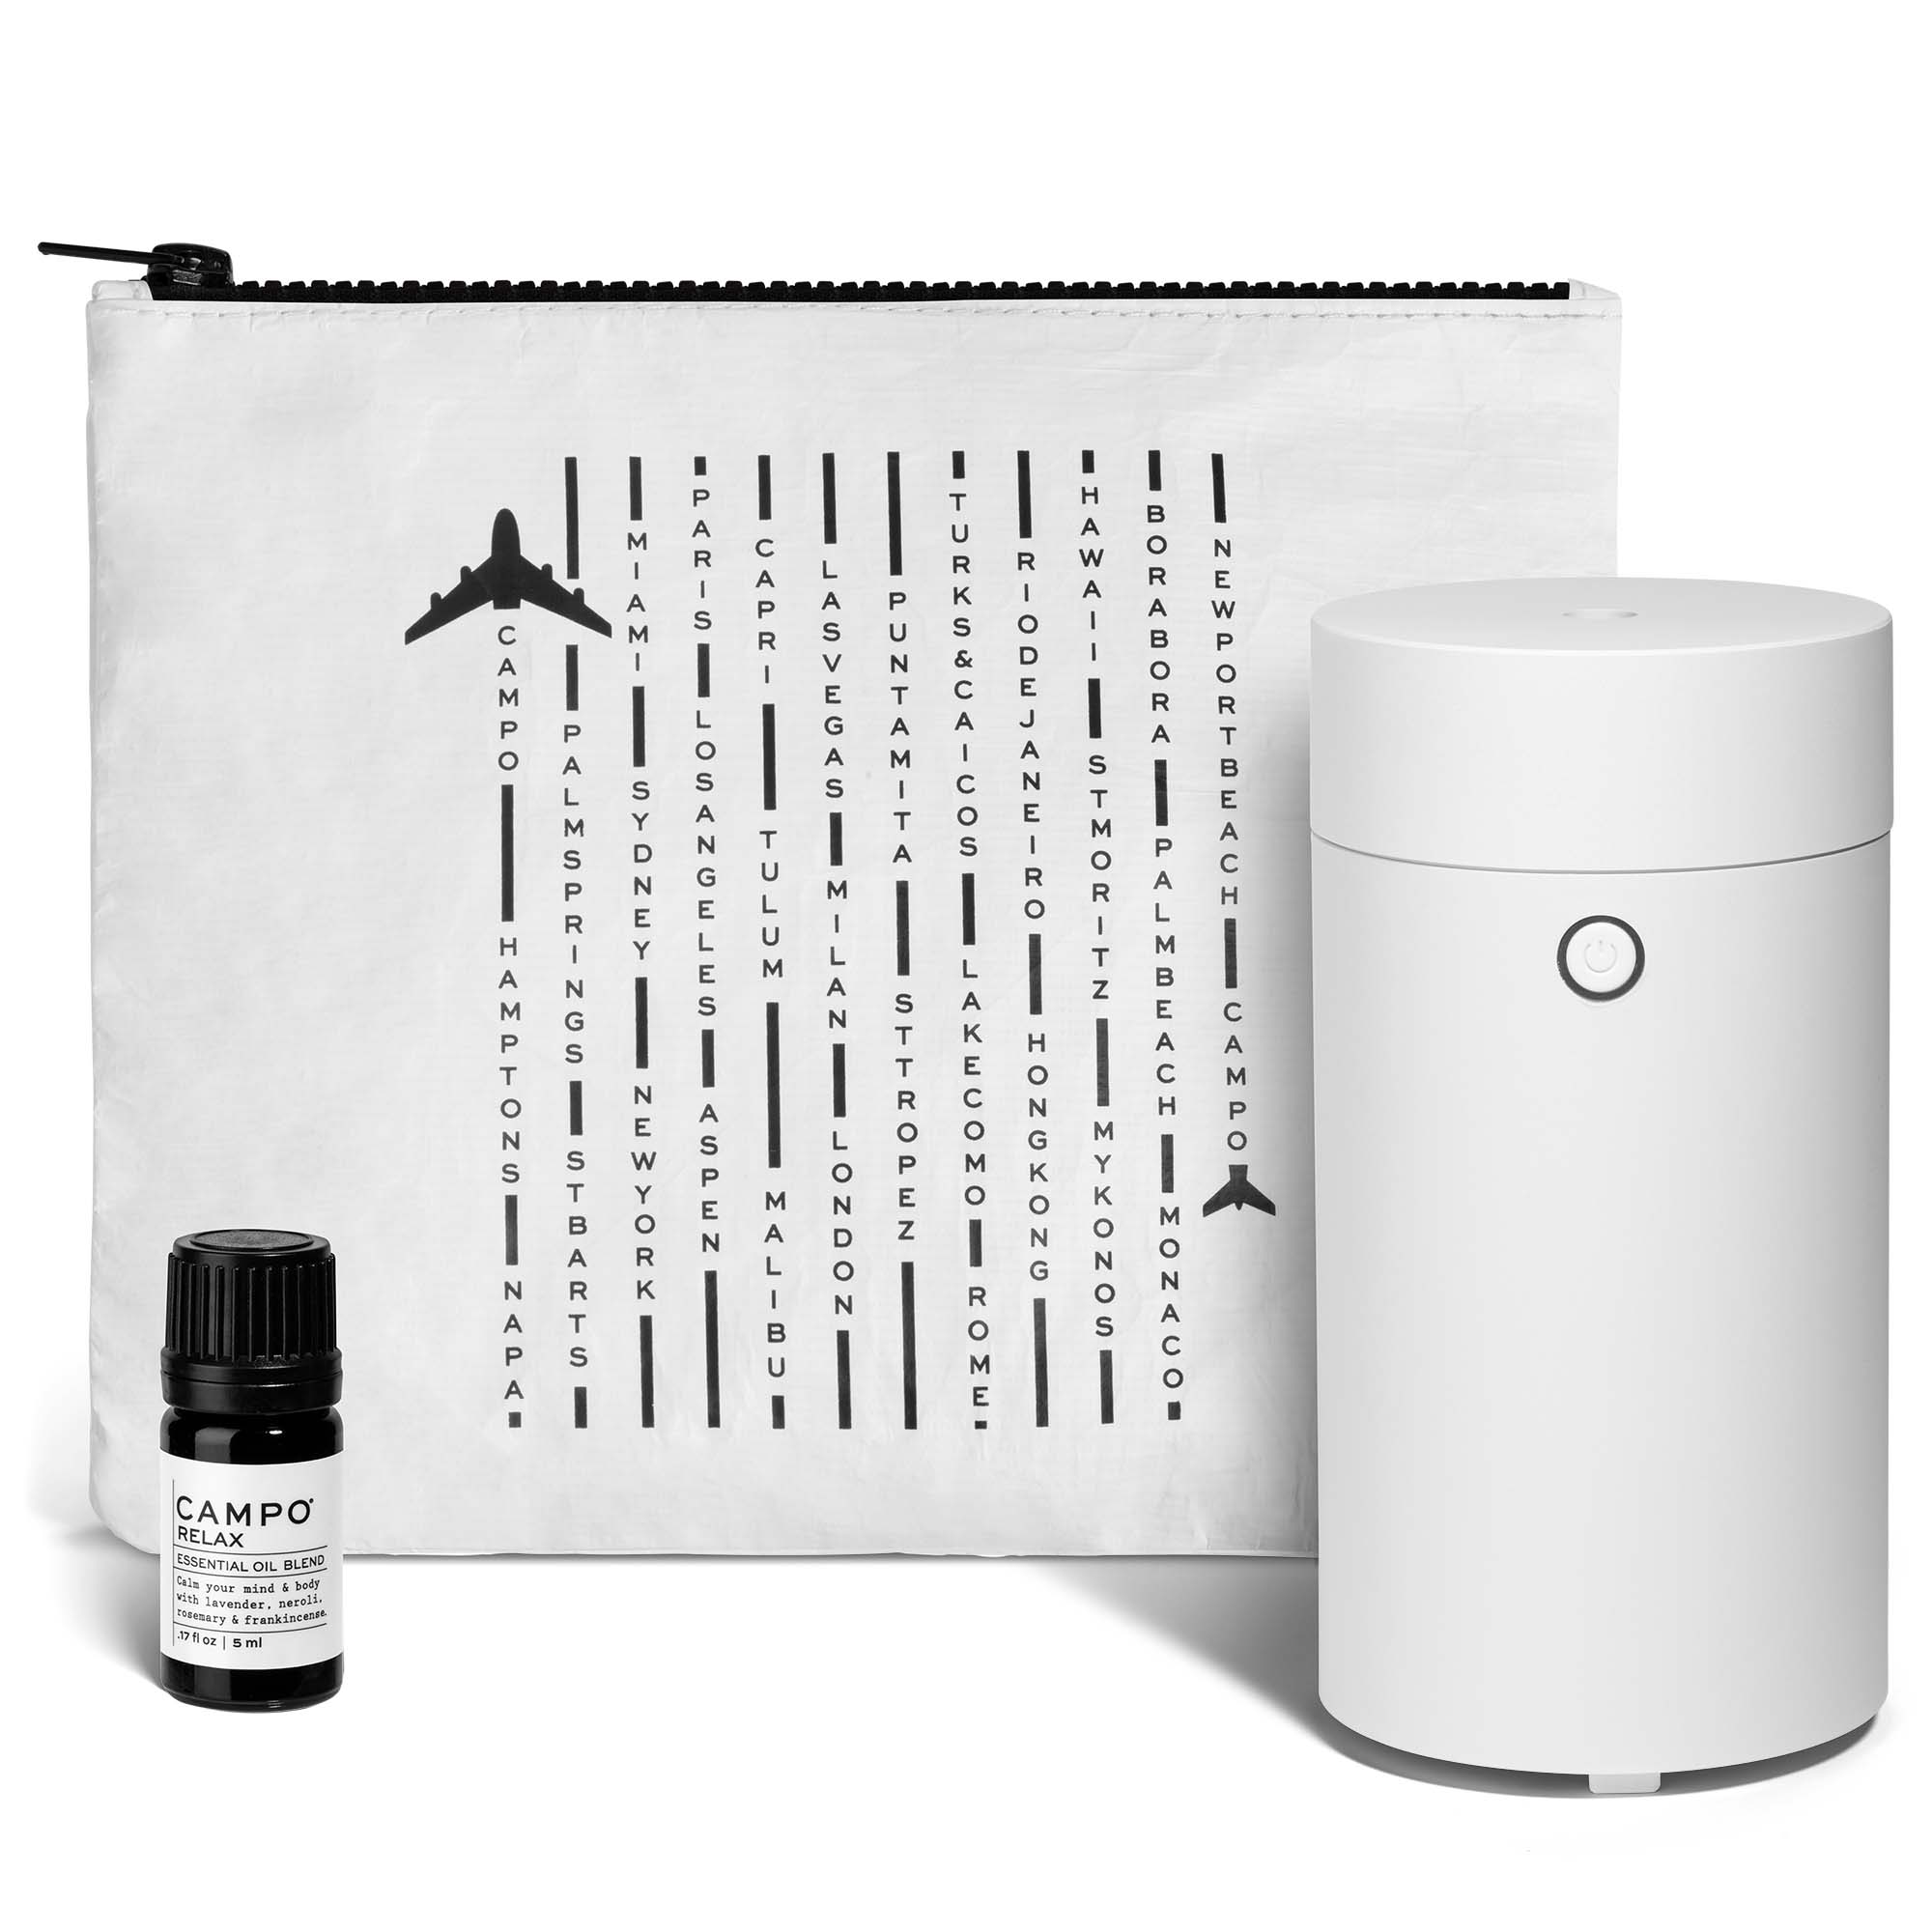 Relaxing Essential Oil Blend for Diffuser - Aromatherapy Blend of Essential  Oils for Diffusers for Home and Travel Stress Support with Lavender